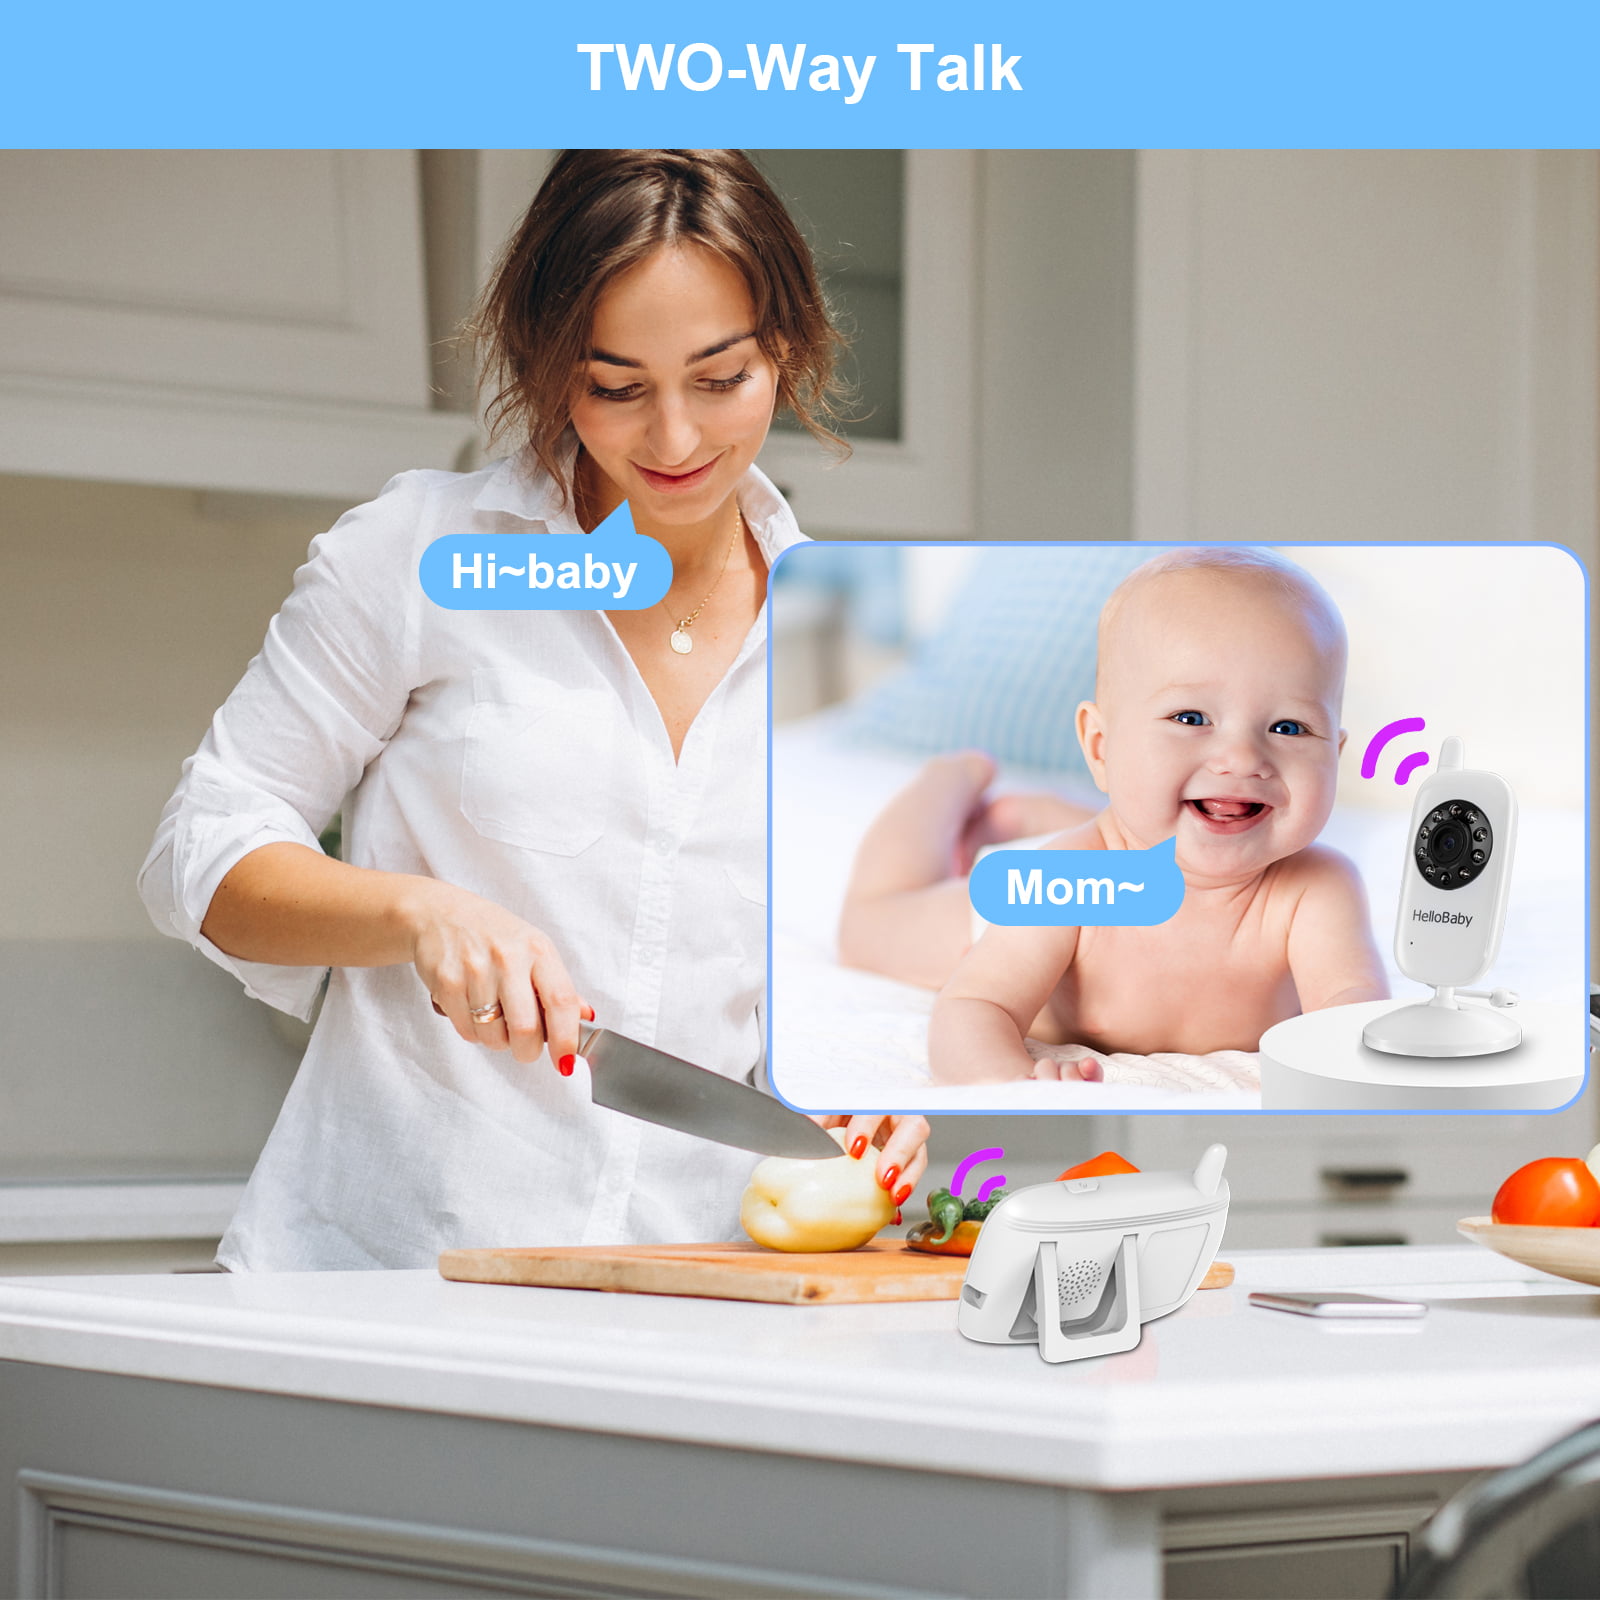 HelloBaby Monitor HB32  Video Baby Monitors with Night Vision